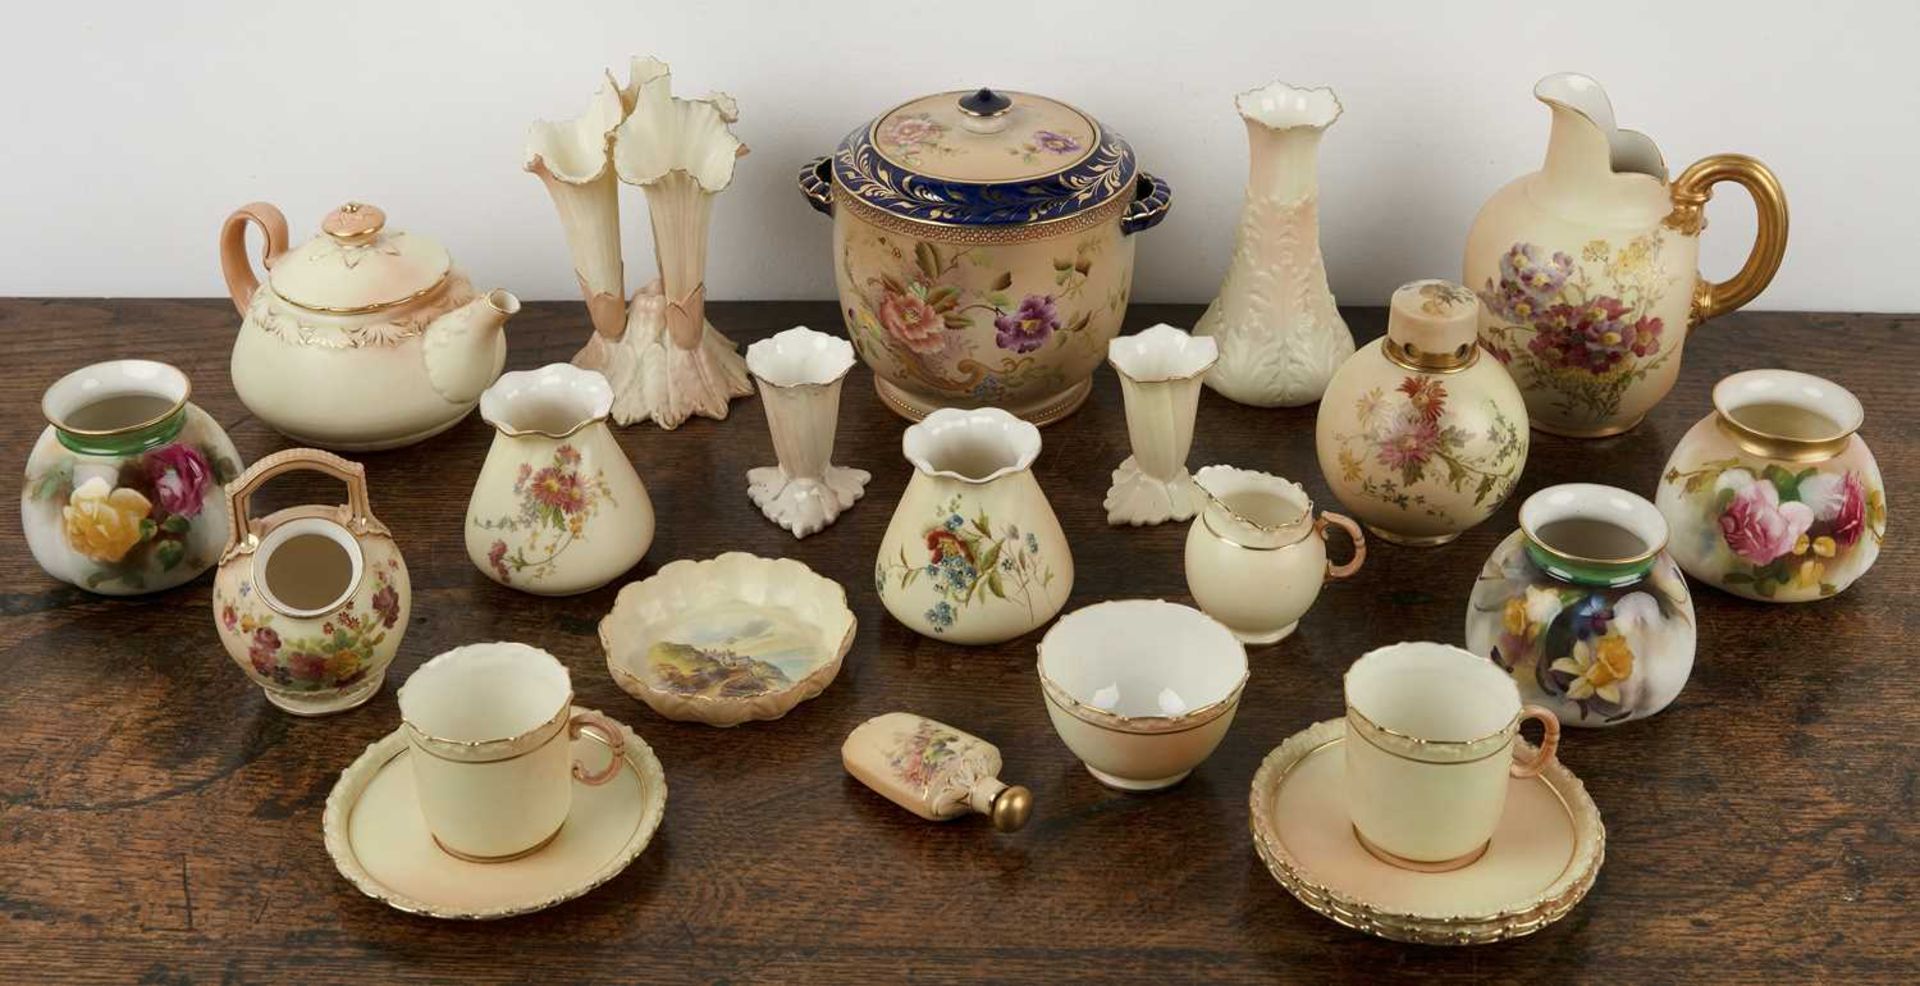 Collection of ceramics and porcelain comprising of: Carlton ware jar and cover, decorated with